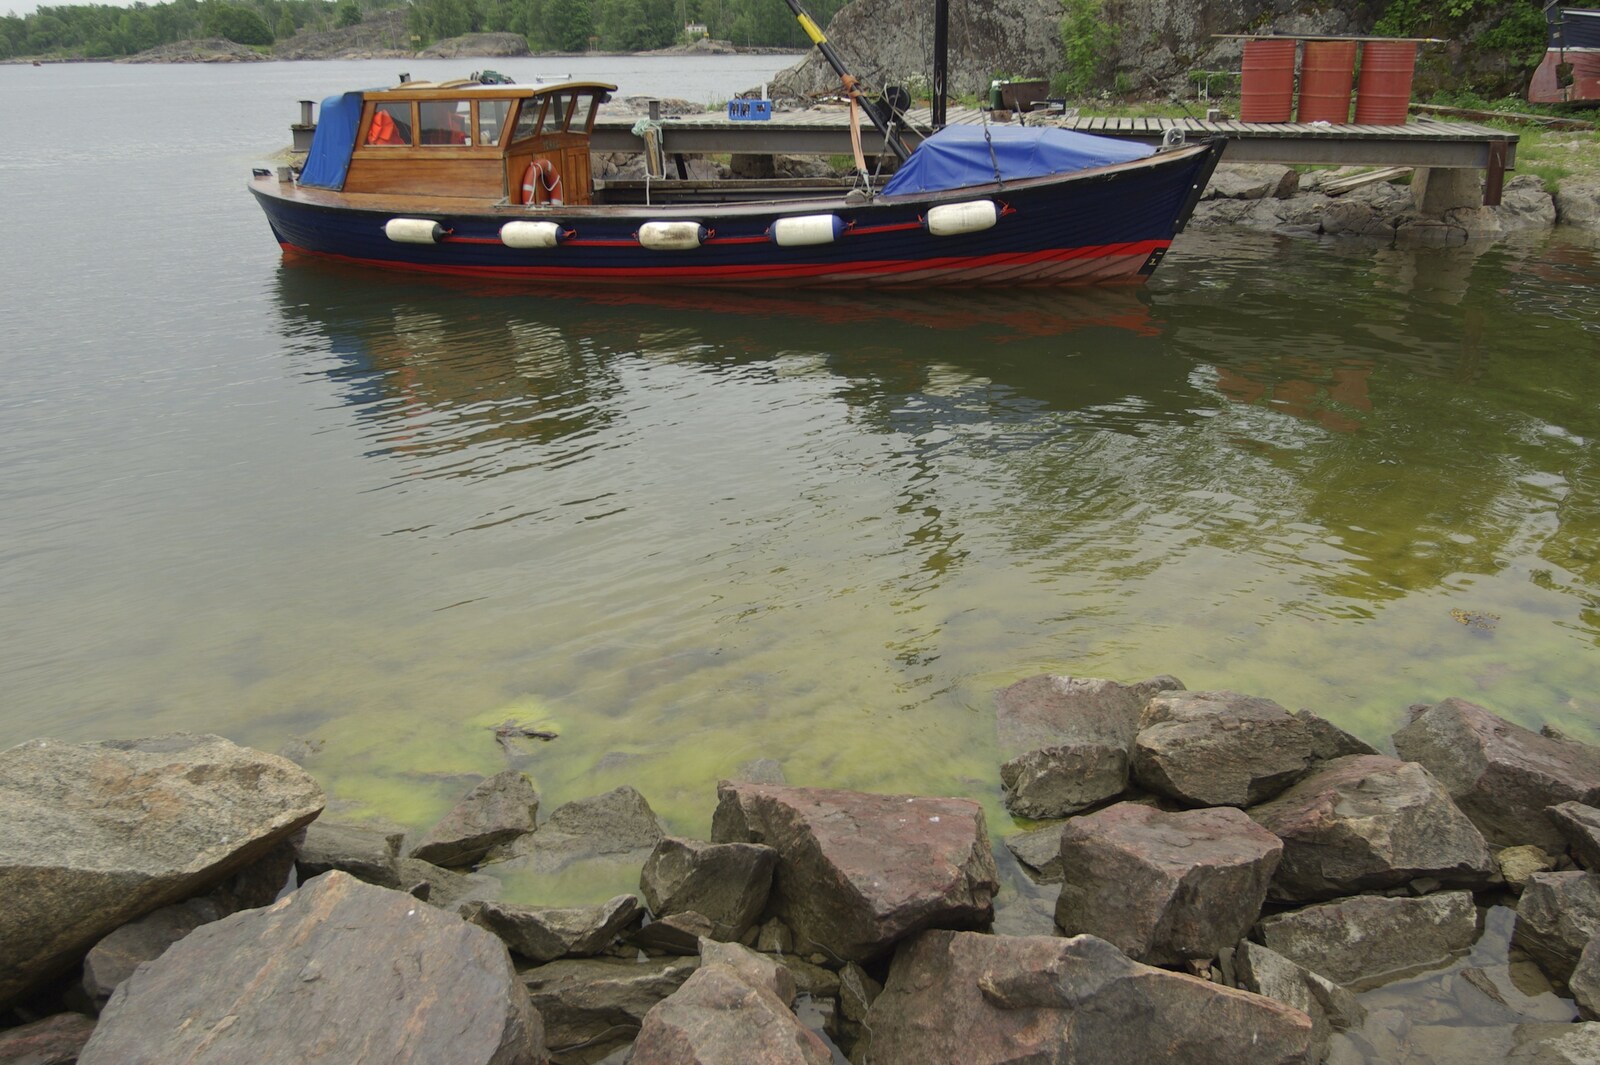 Genesis in Concert, and Suomenlinna, Helsinki, Finland - 11th June 2007: A nice old boat by a jetty